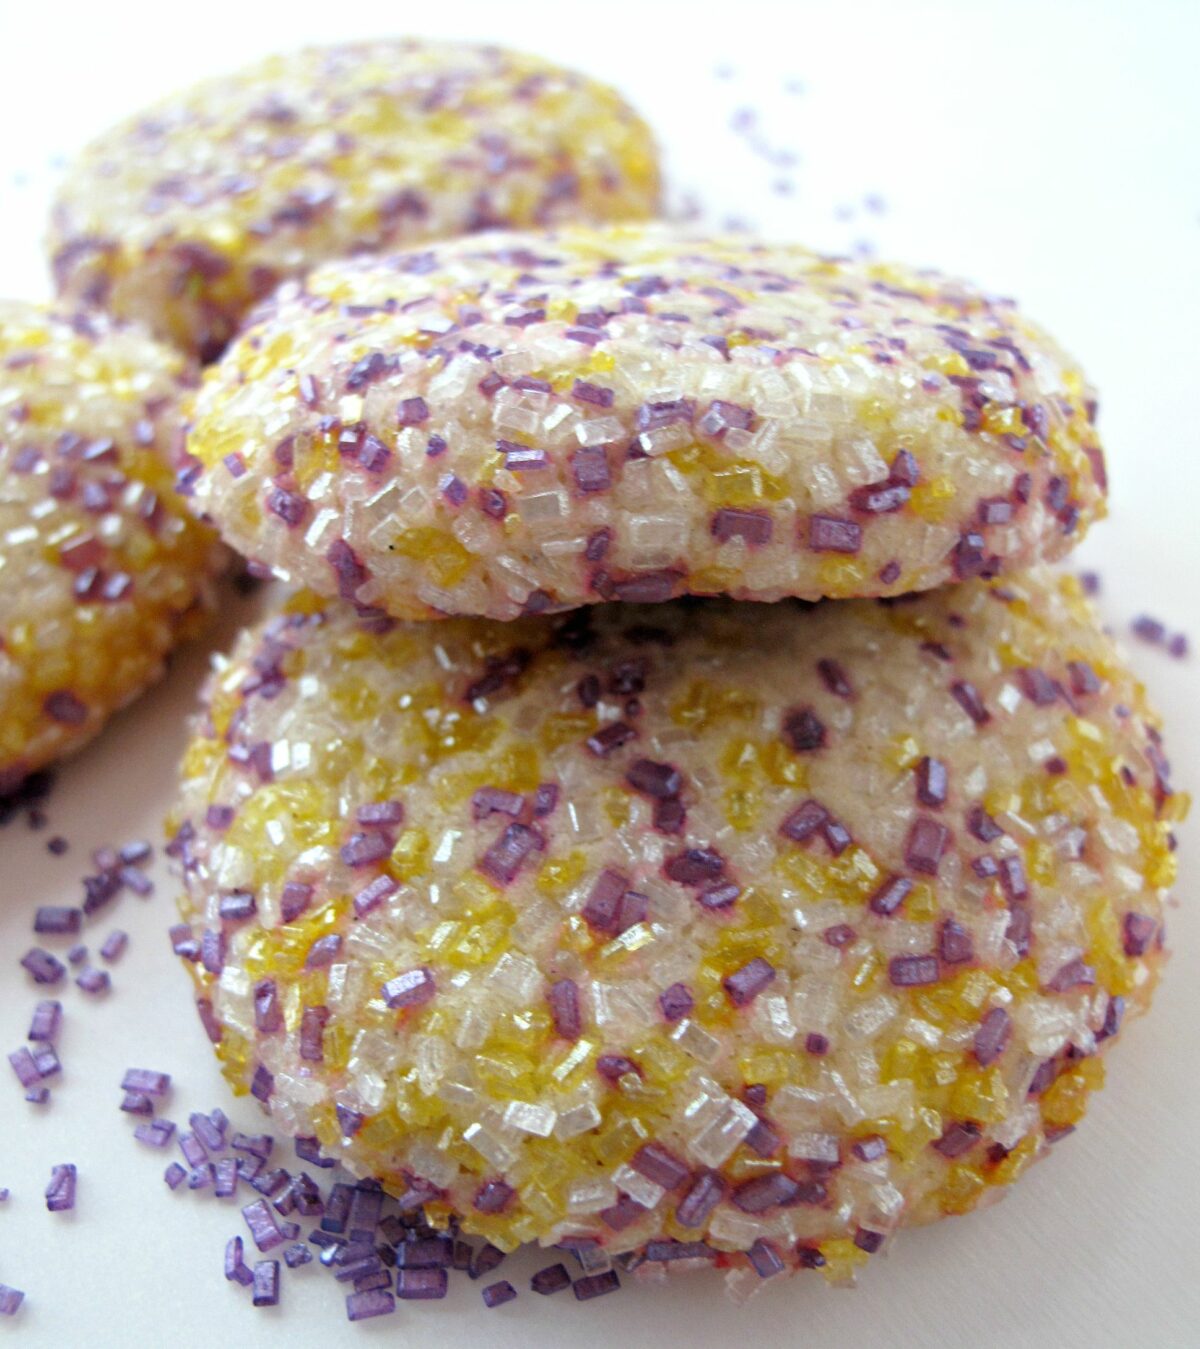 Two thick cookies coated in large crystal decorating sugar.